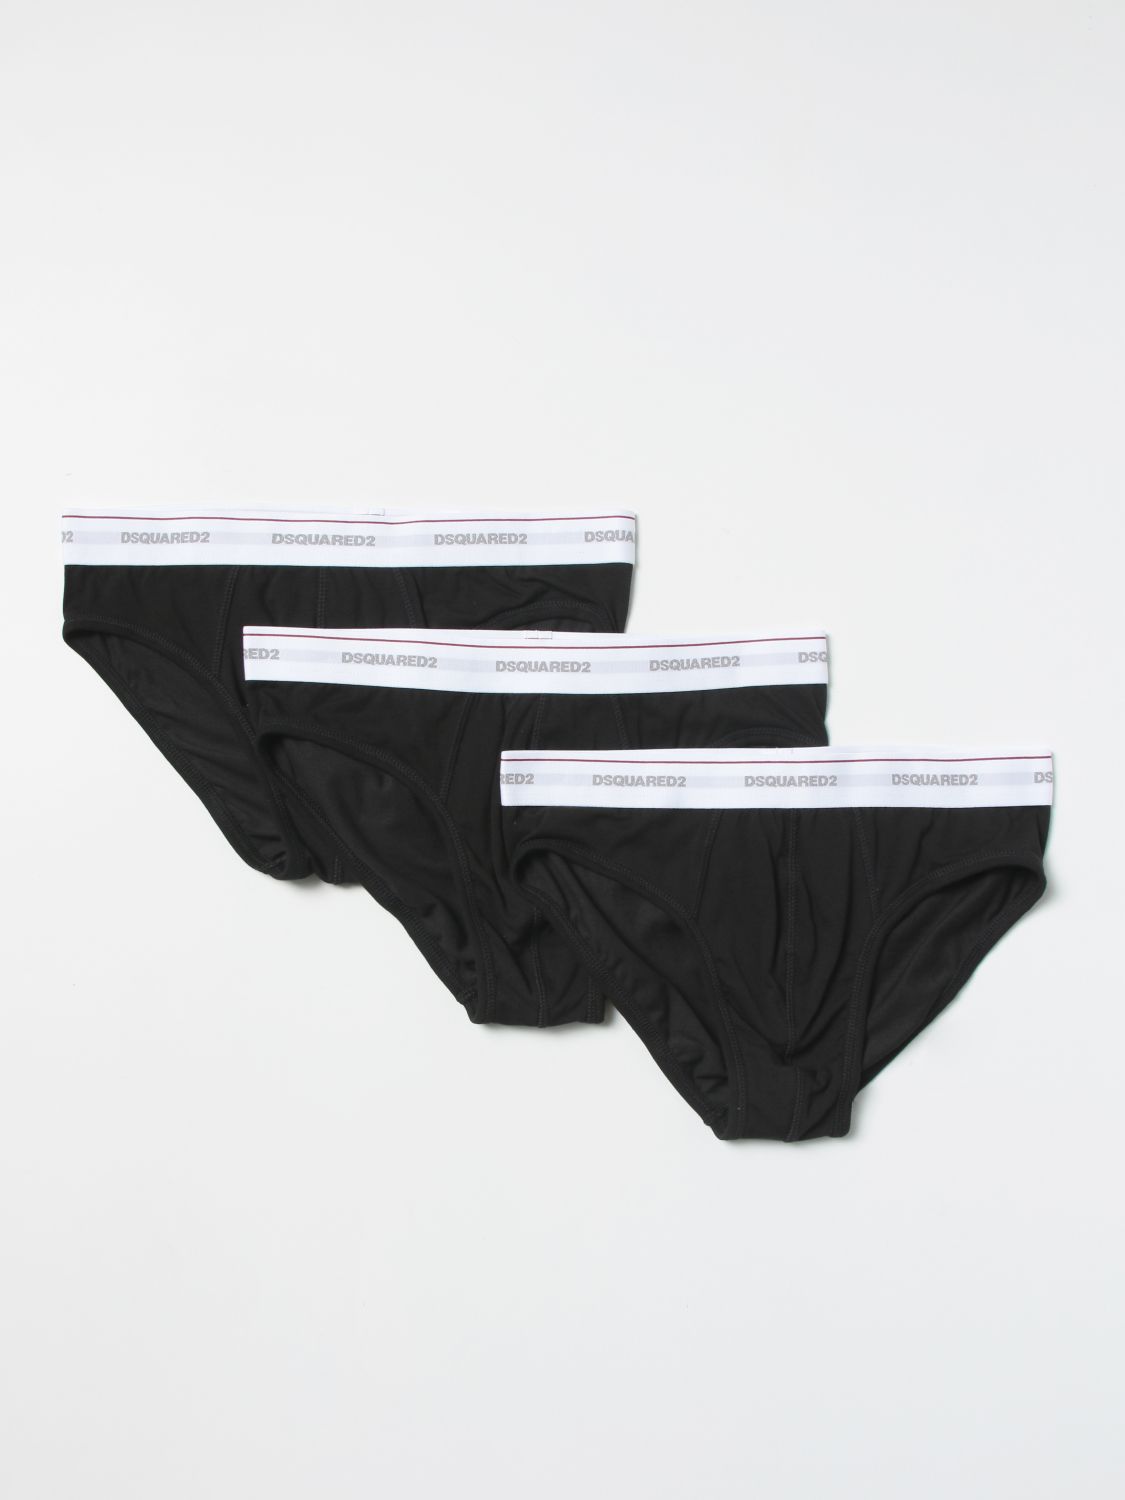 DSQUARED2 SET OF 3 DSQUARED2 BRIEFS WITH LOGO,C89858002